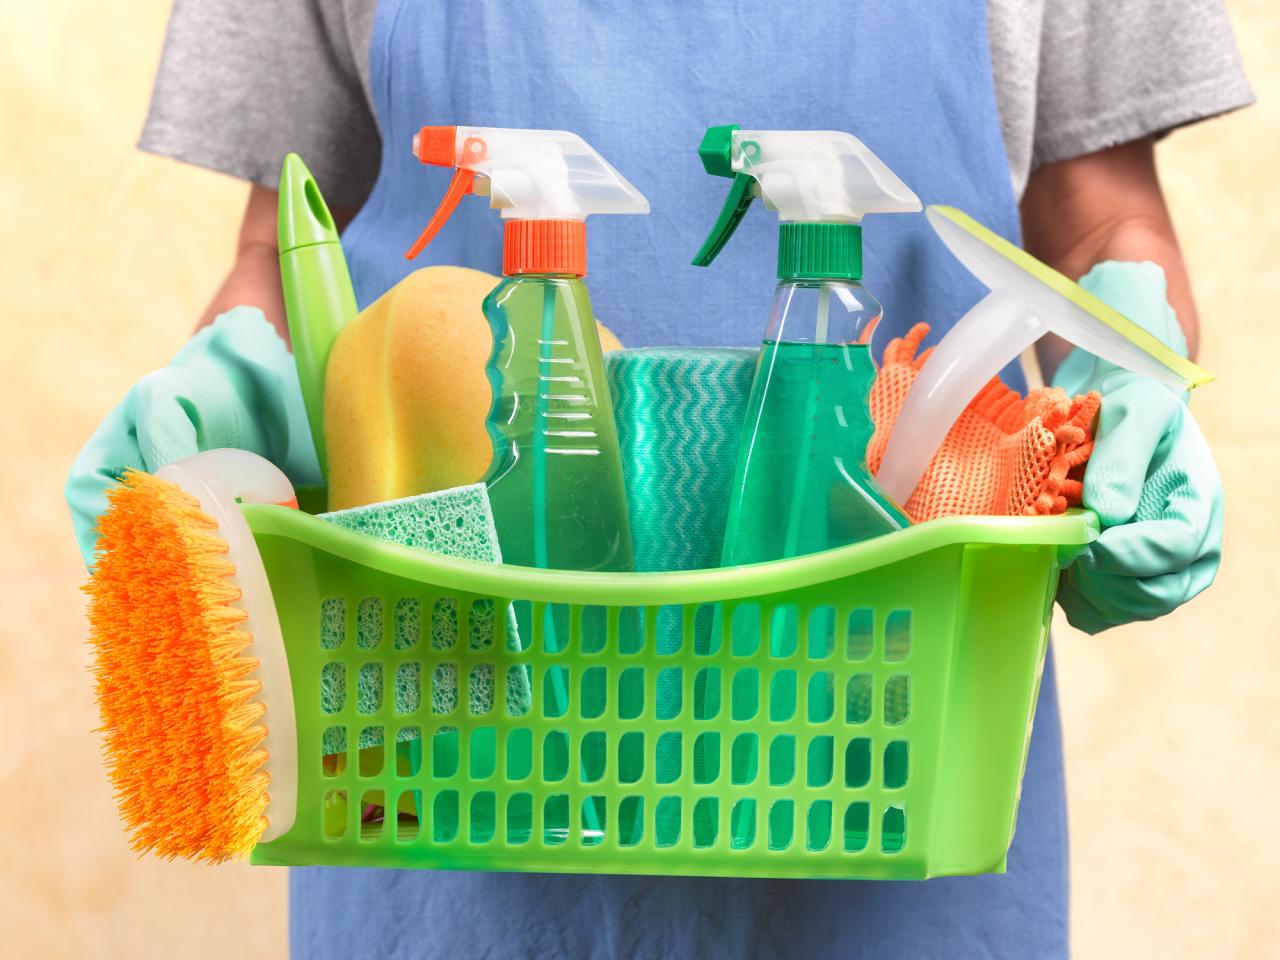 Many common household cleaning products can kill the coronavirus